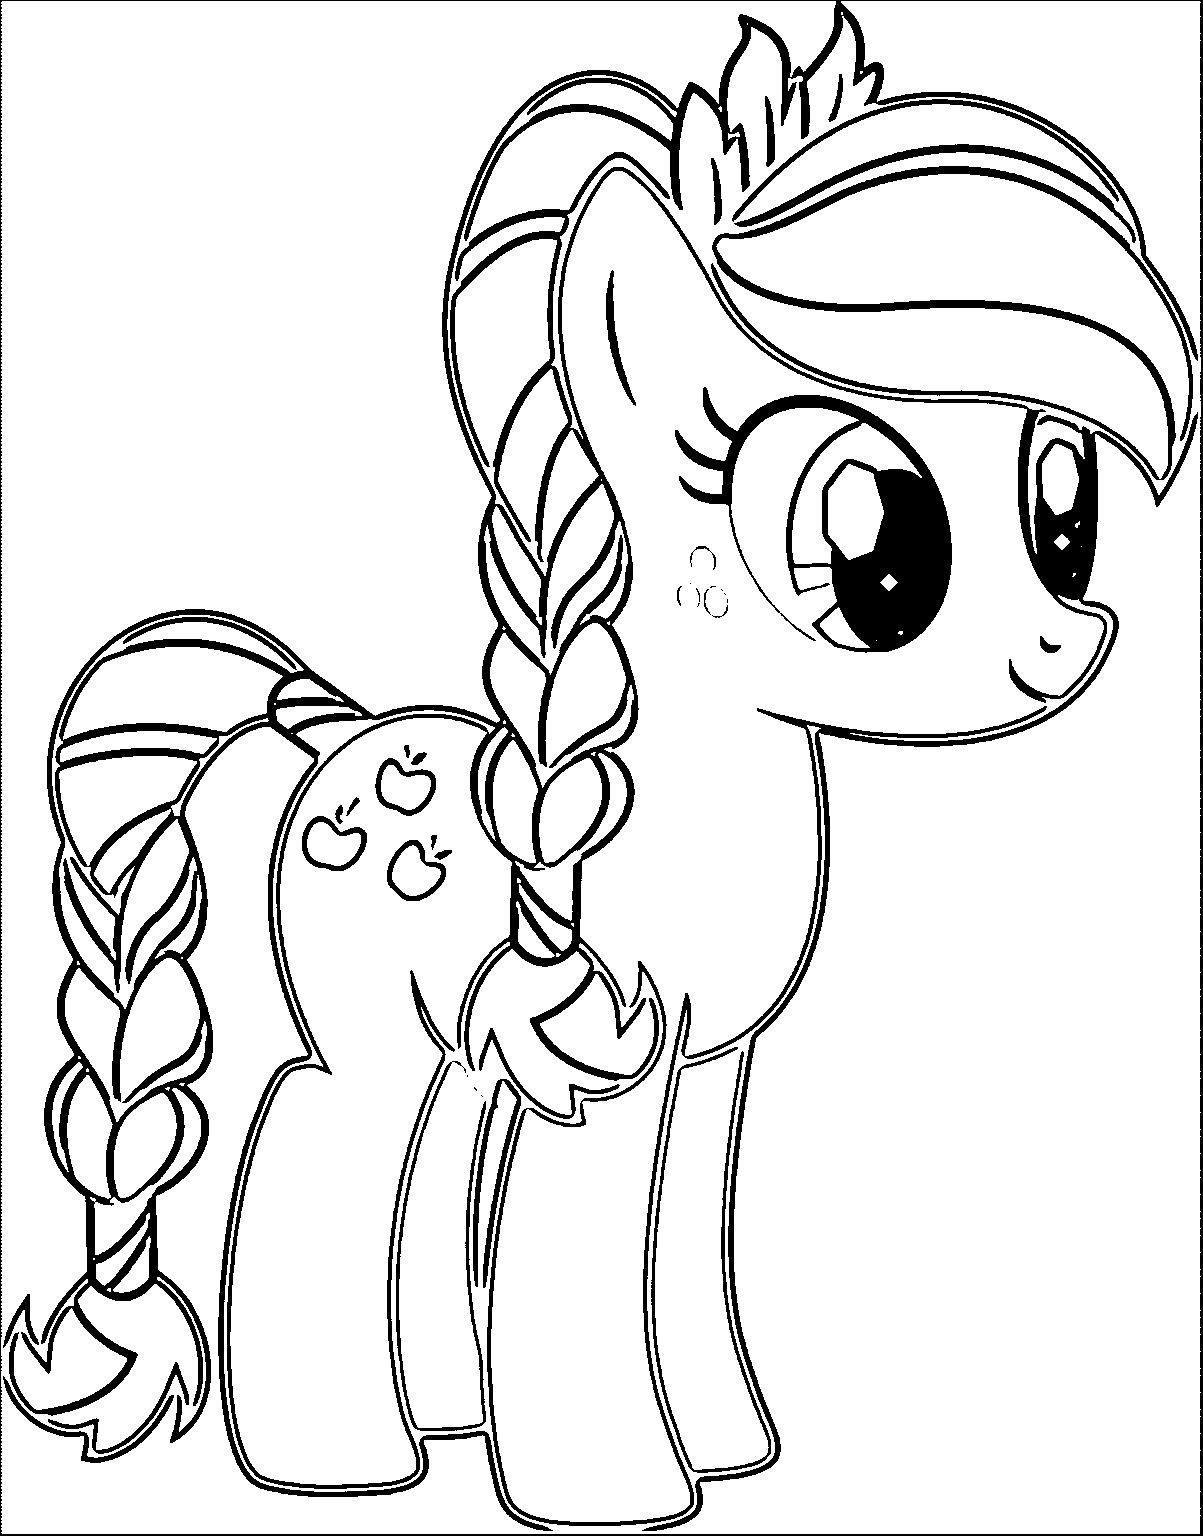 colouring pages little pony my little pony scootaloo coloring page free printable little pony colouring pages 